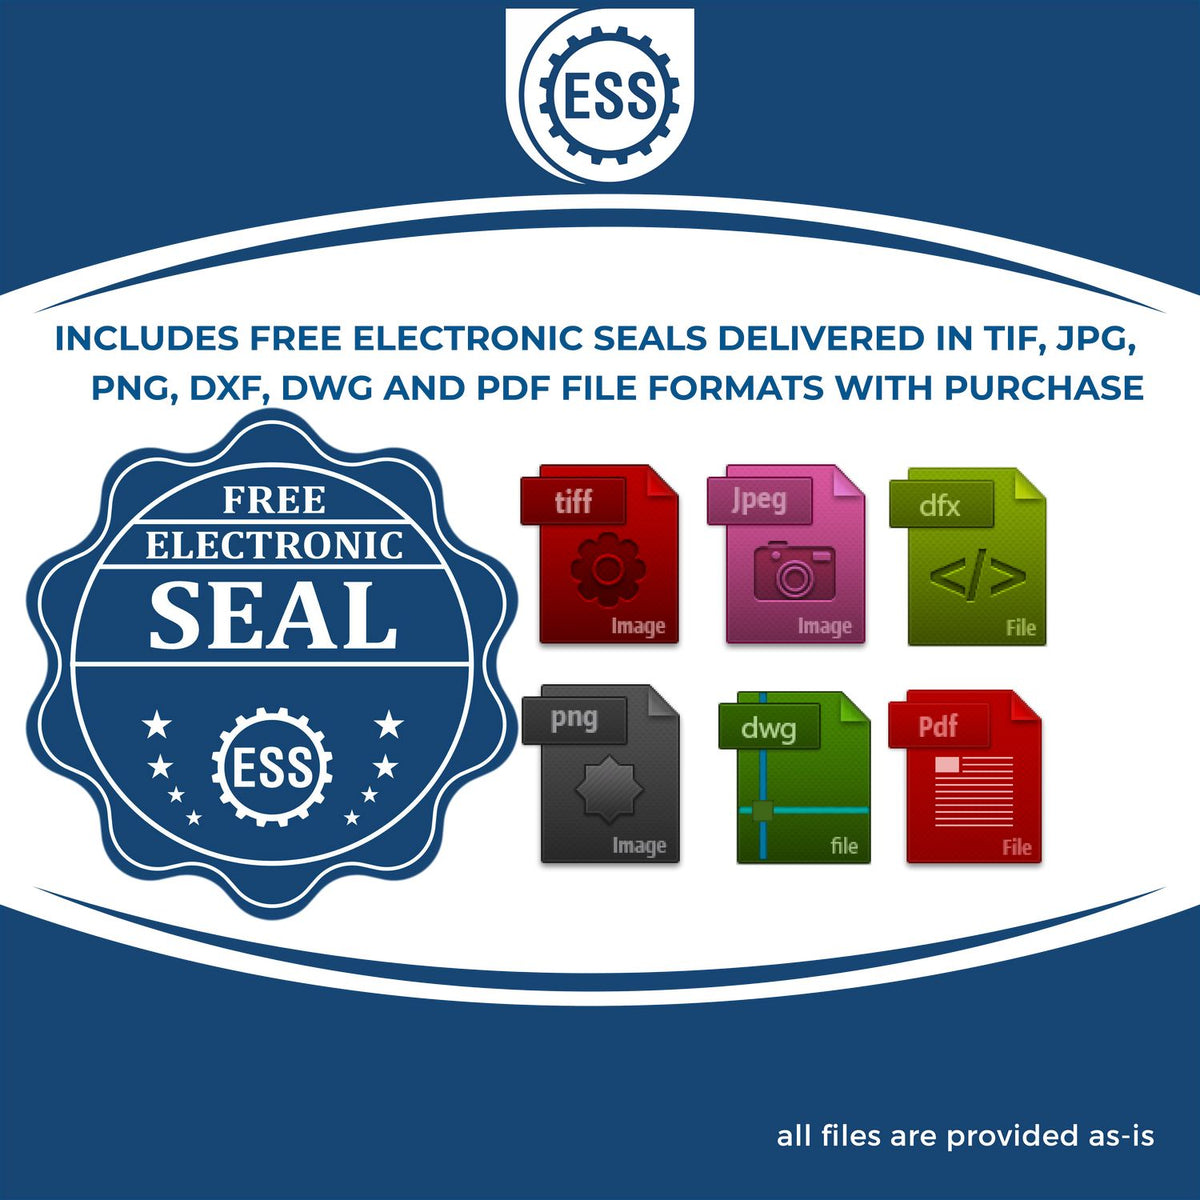 An infographic for the free electronic seal for the Louisiana Desk Architect Embossing Seal illustrating the different file type icons such as DXF, DWG, TIF, JPG and PNG.